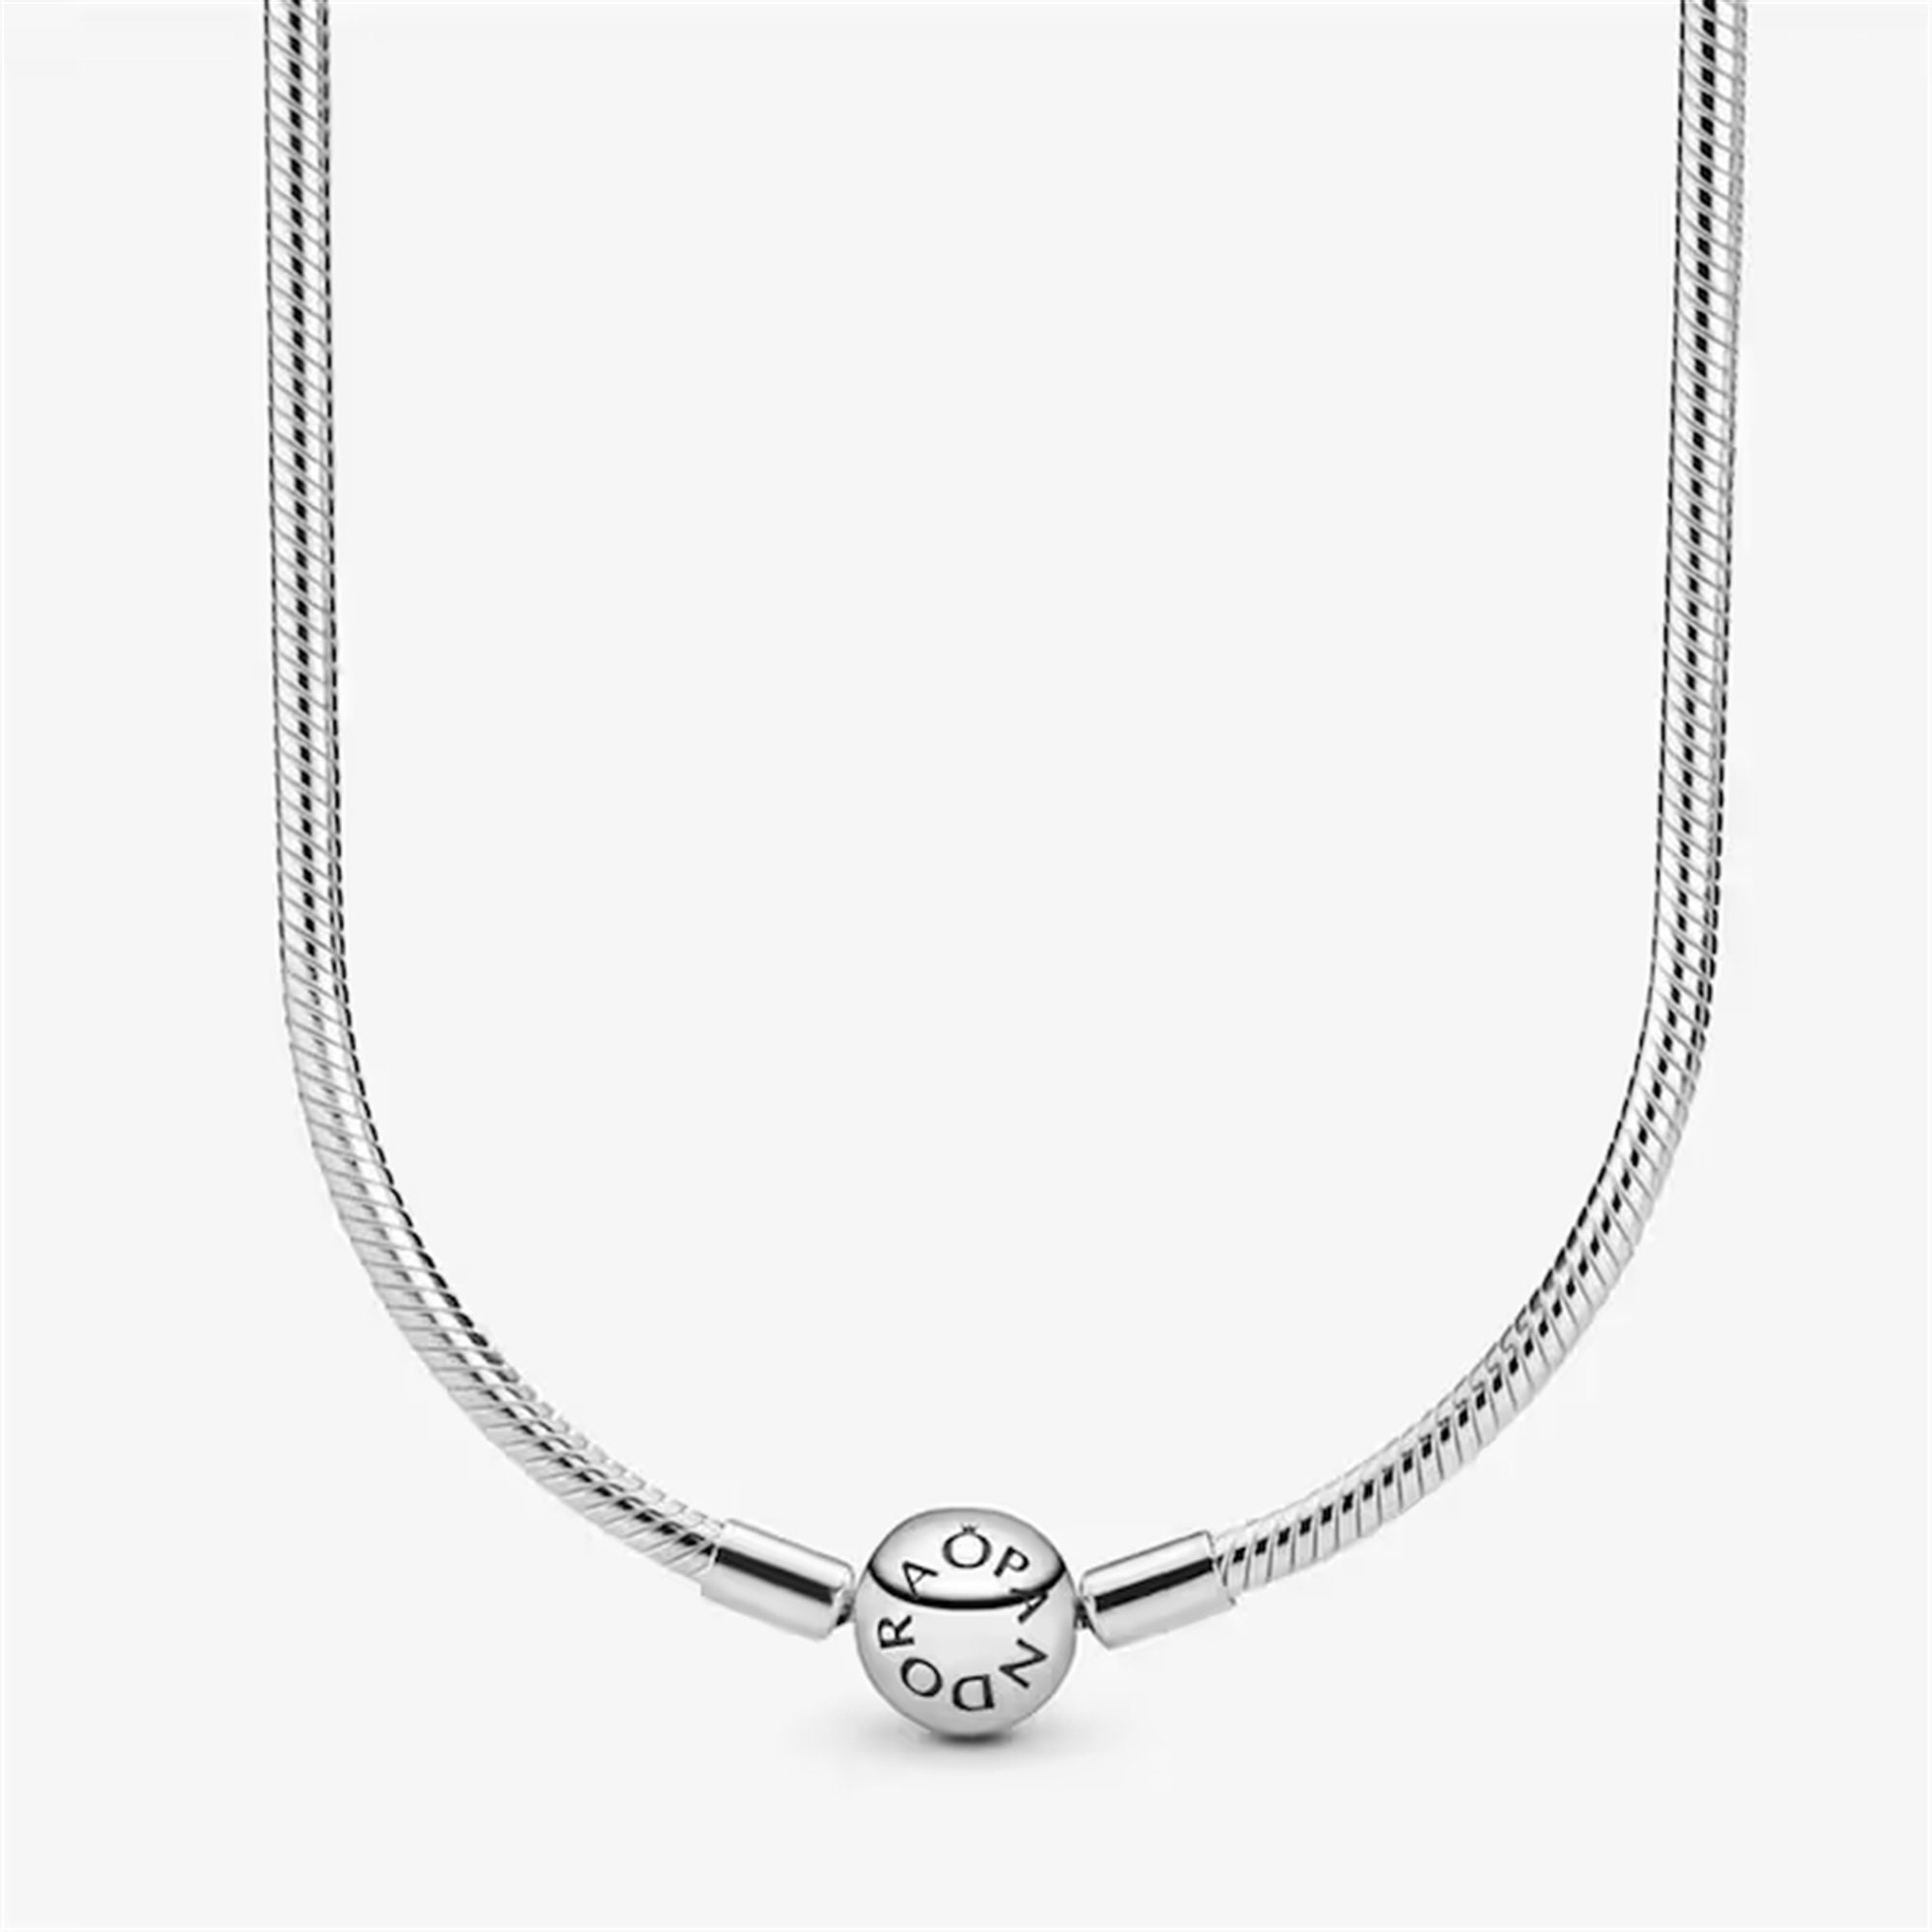 Fits Pandora Sterling Silver Bracelet Cute Panda Heart Dangle Beads Charms  For European Snake Charm Chain Fashion DIY Jewelry Wholesale From  Annawang2016, $0.61